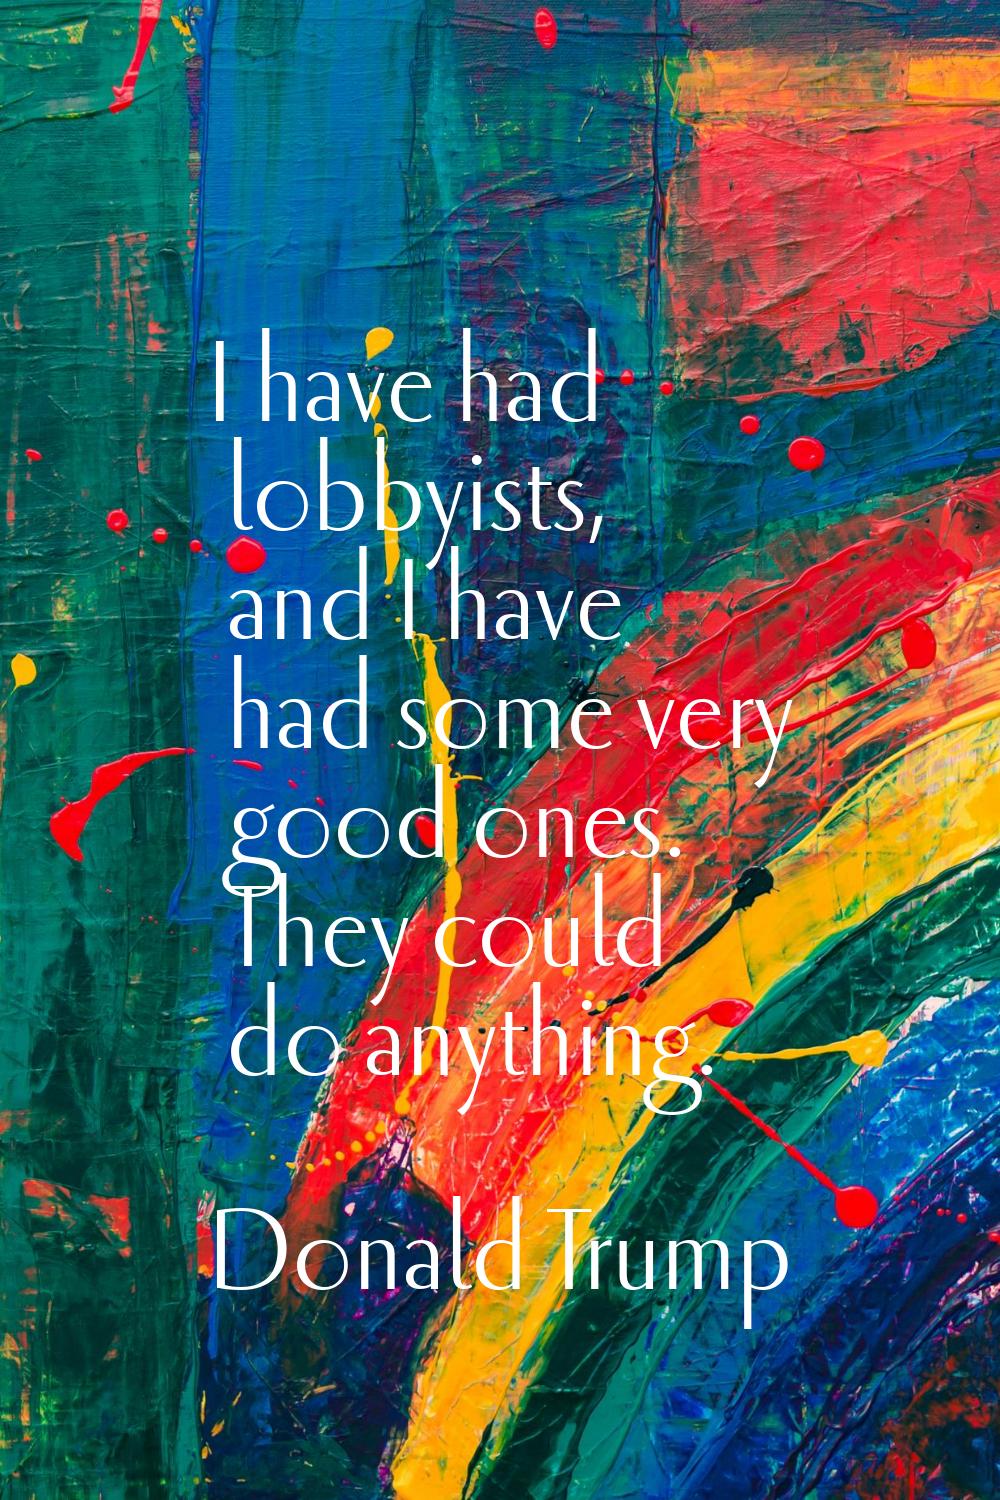 I have had lobbyists, and I have had some very good ones. They could do anything.